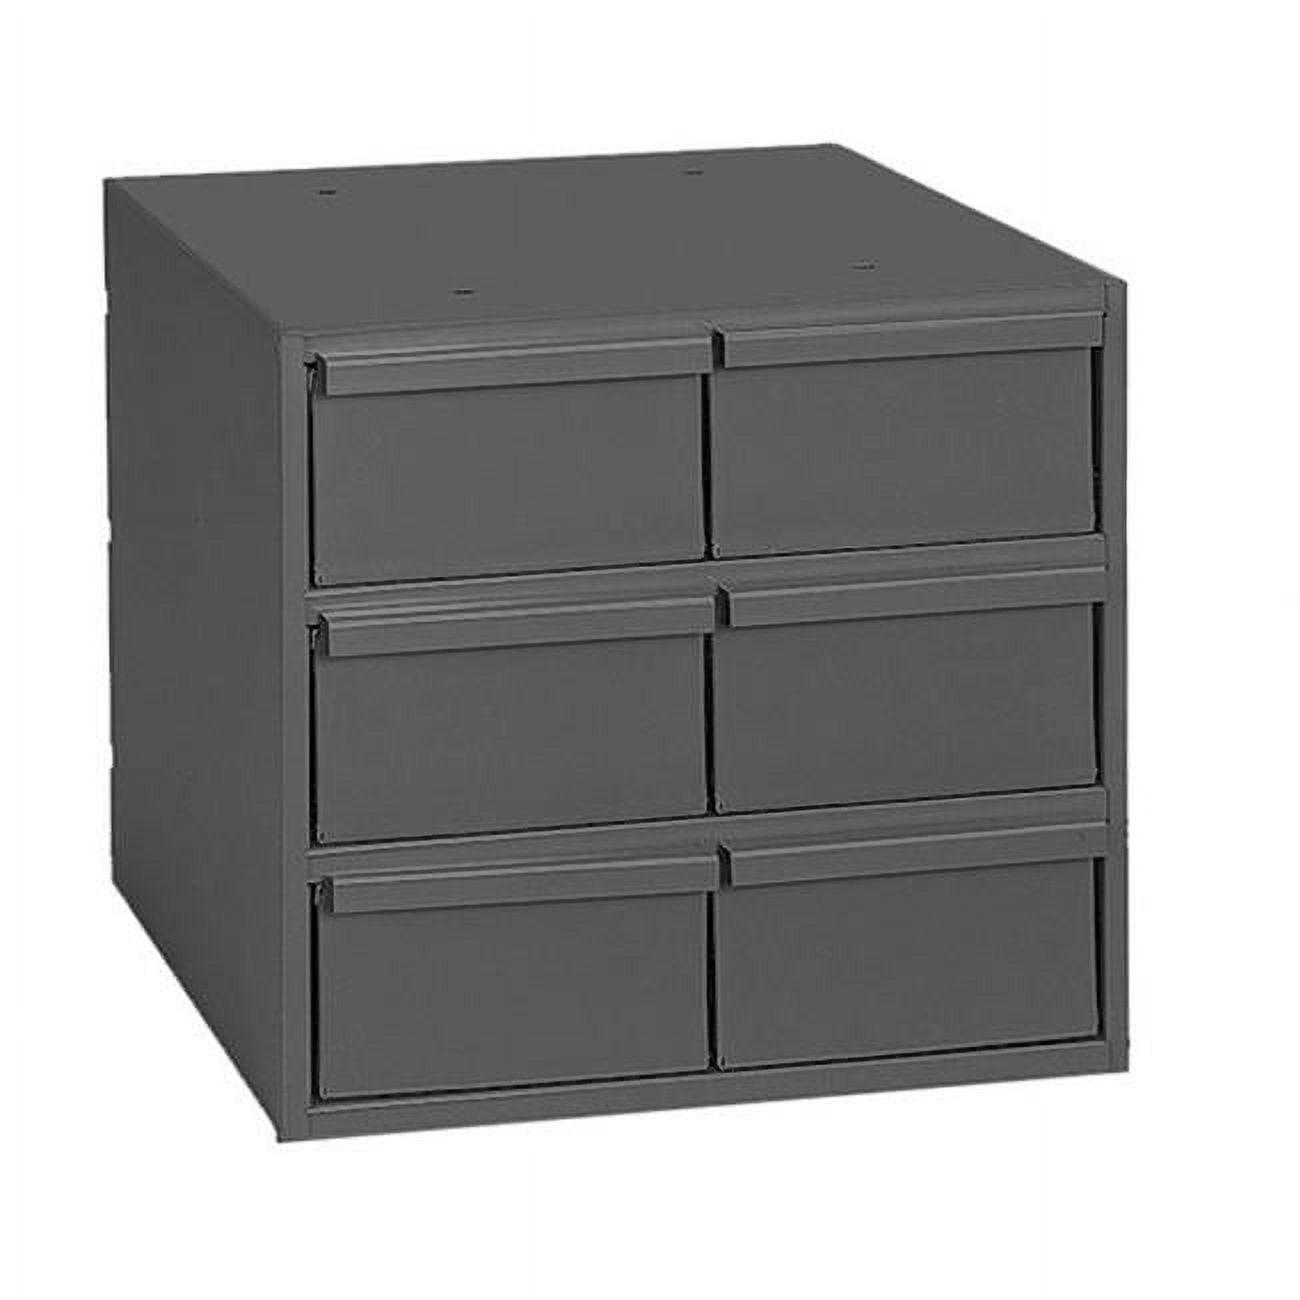 Compact Gray Steel 6-Drawer Organizer Cabinet with Adjustable Dividers